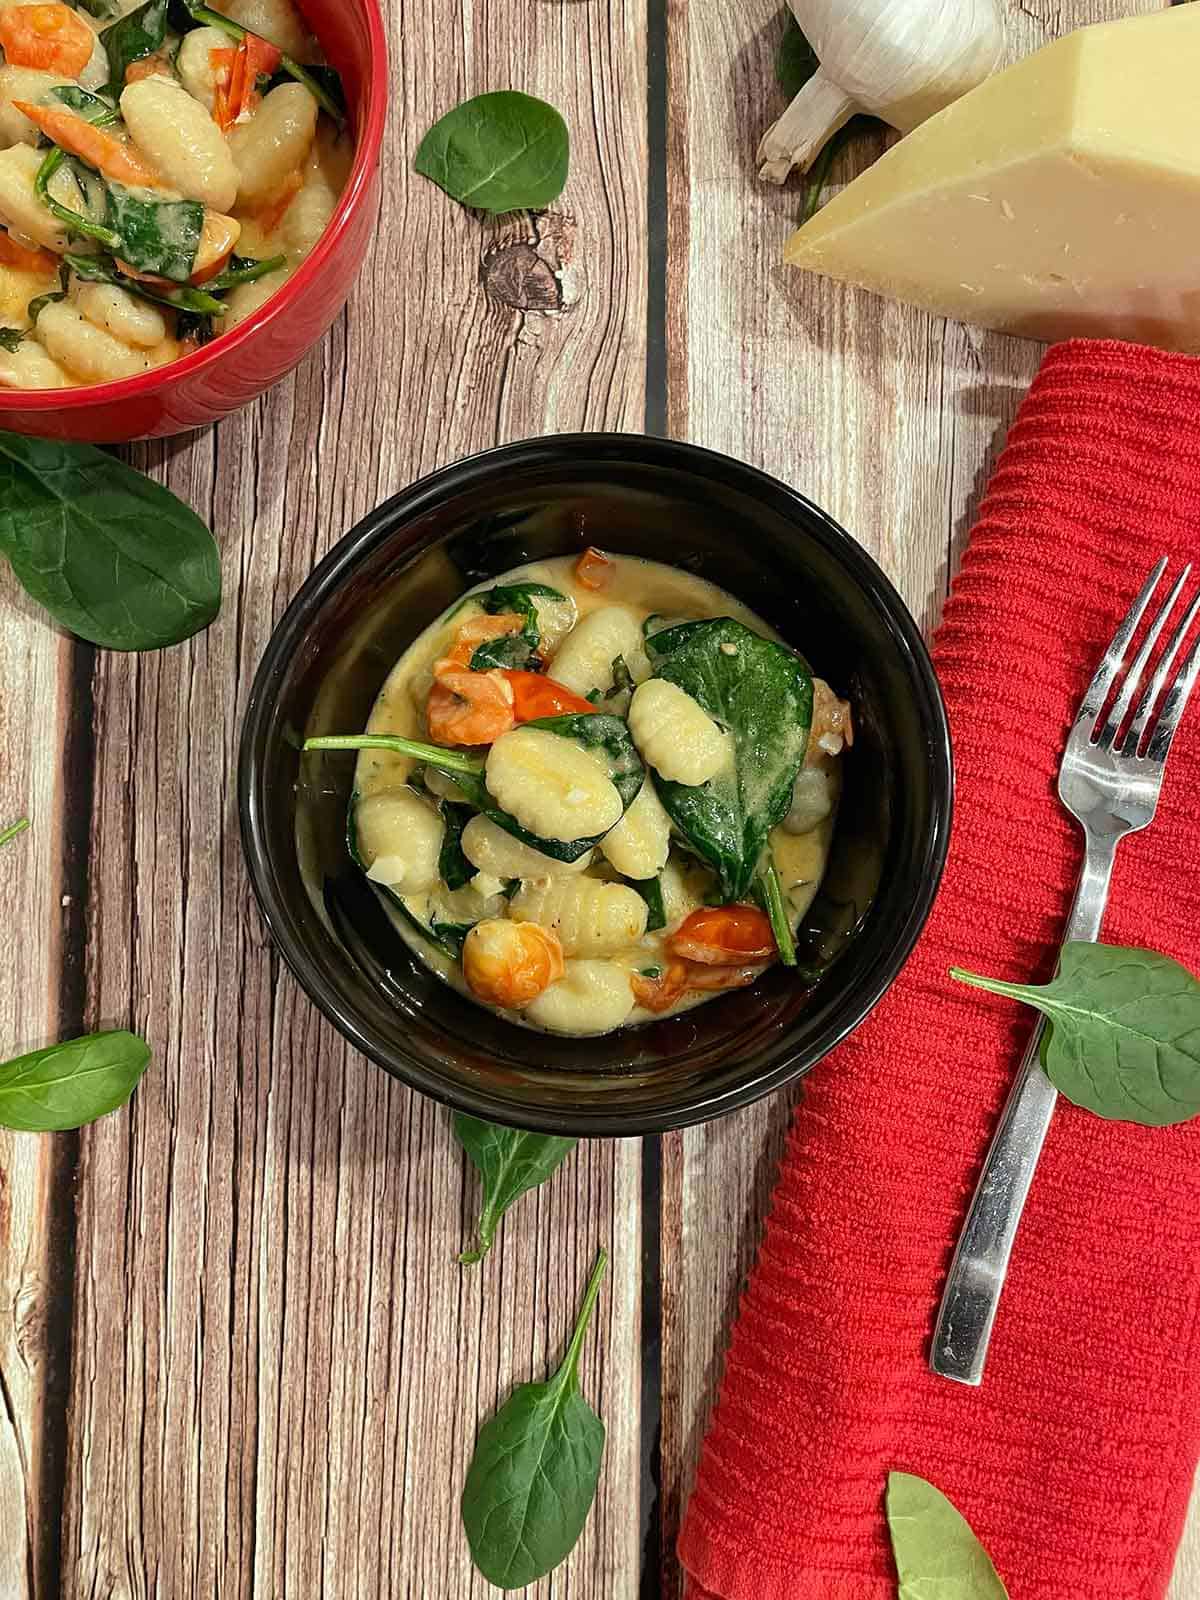 Creamy spinach gnocchi with basil and cherry tomatoes in a bowl.